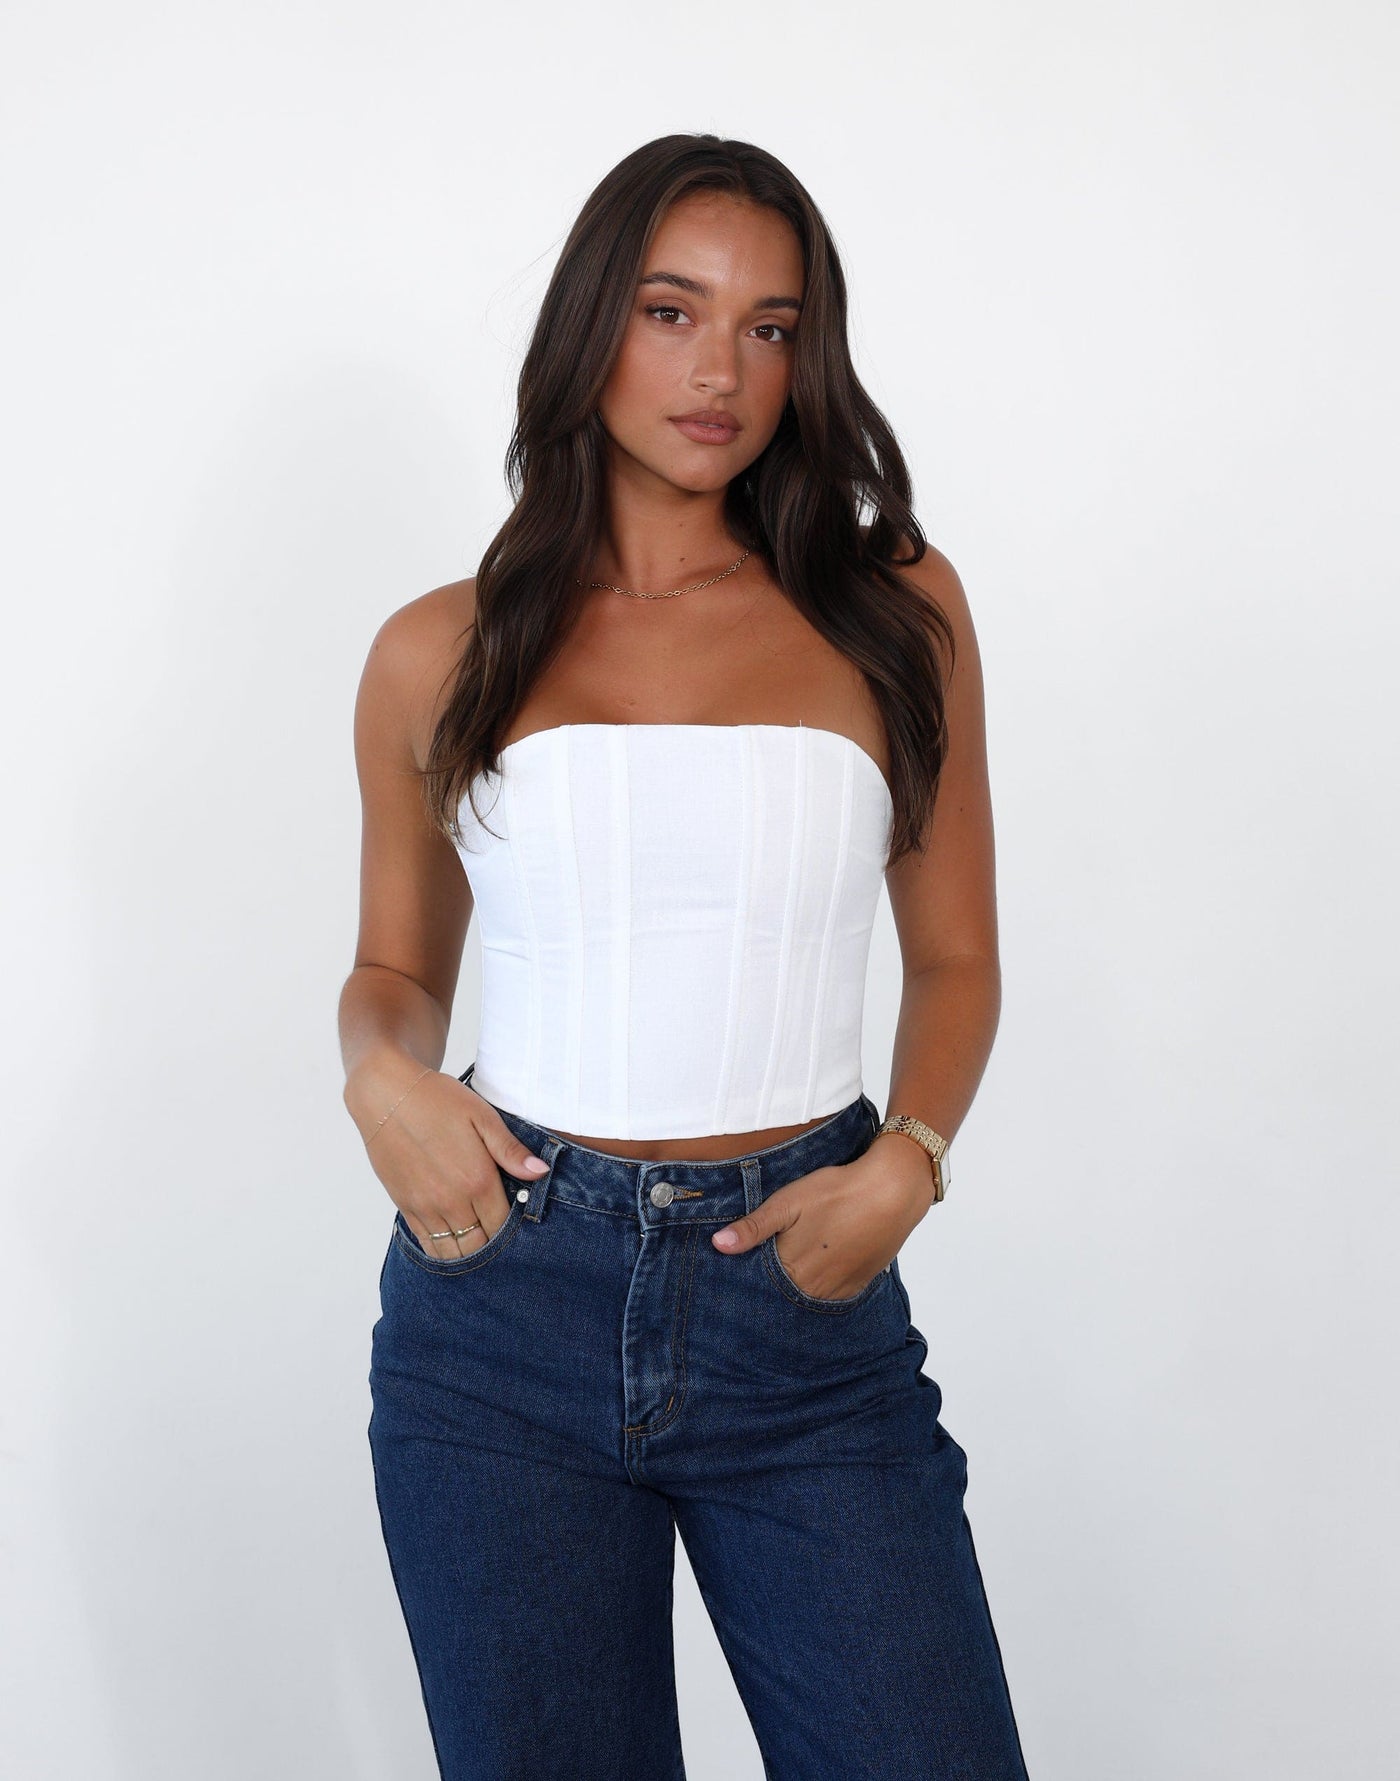 Own The Moment Top (White) - Strapless Corset Crop Top - Women's Top - Charcoal Clothing